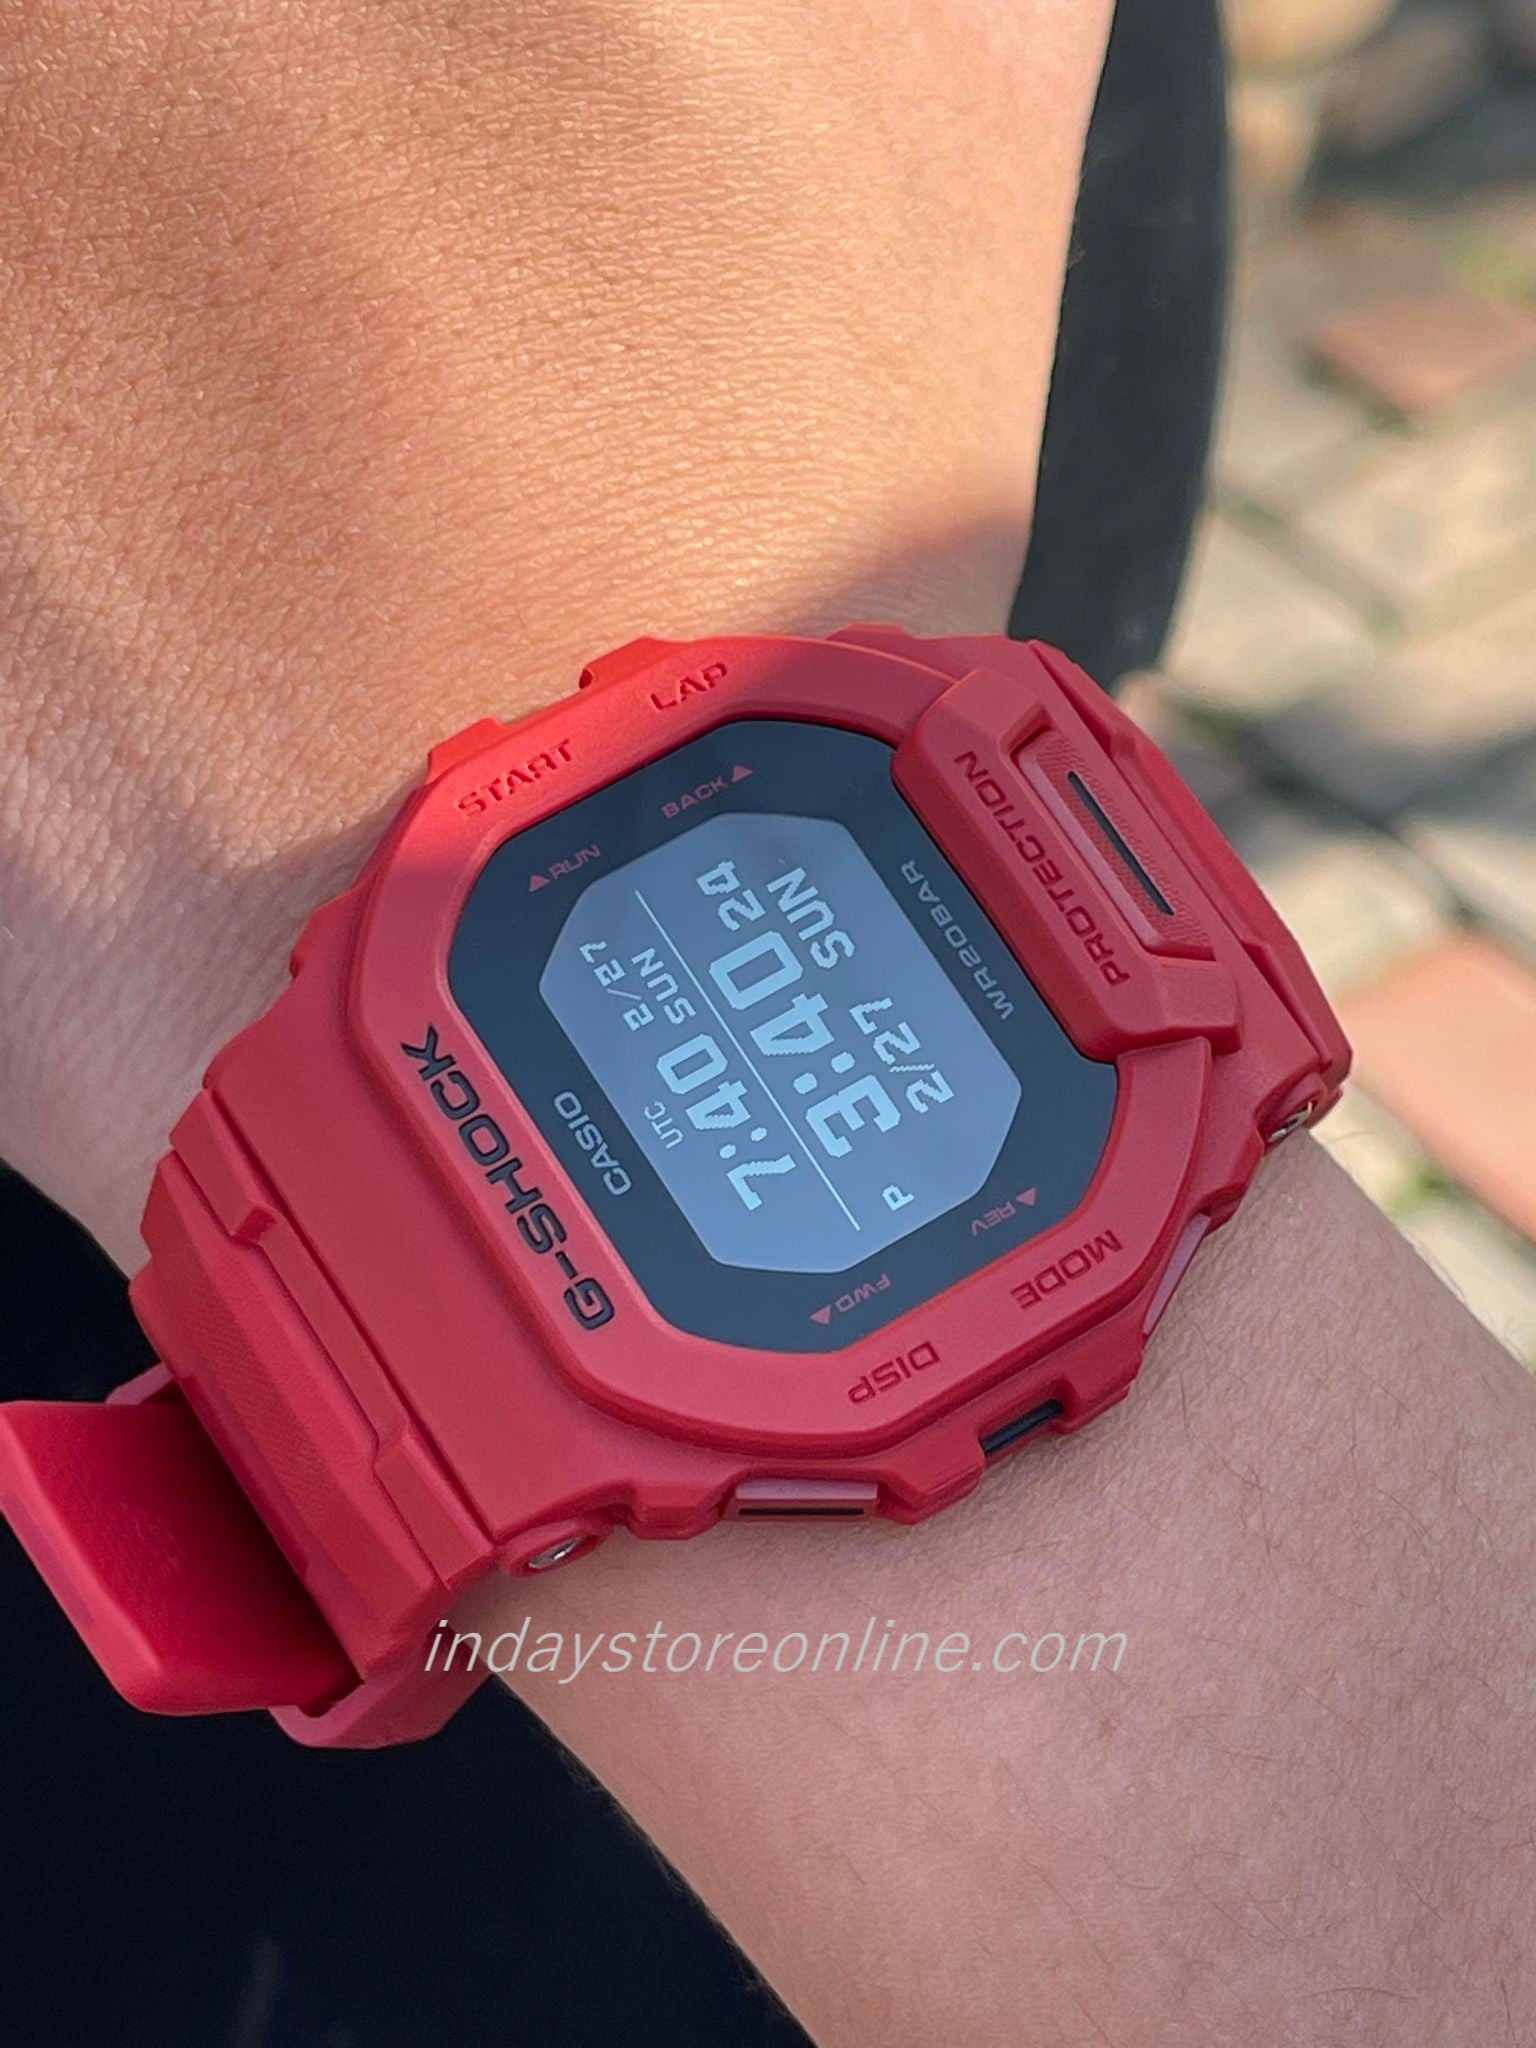 Casio G-Shock Men's Watch GBD-200RD-4 Digital G-Squad Red Out Sports  Edition Great for Runner Mobile link (Automatic connection, wireless  linking